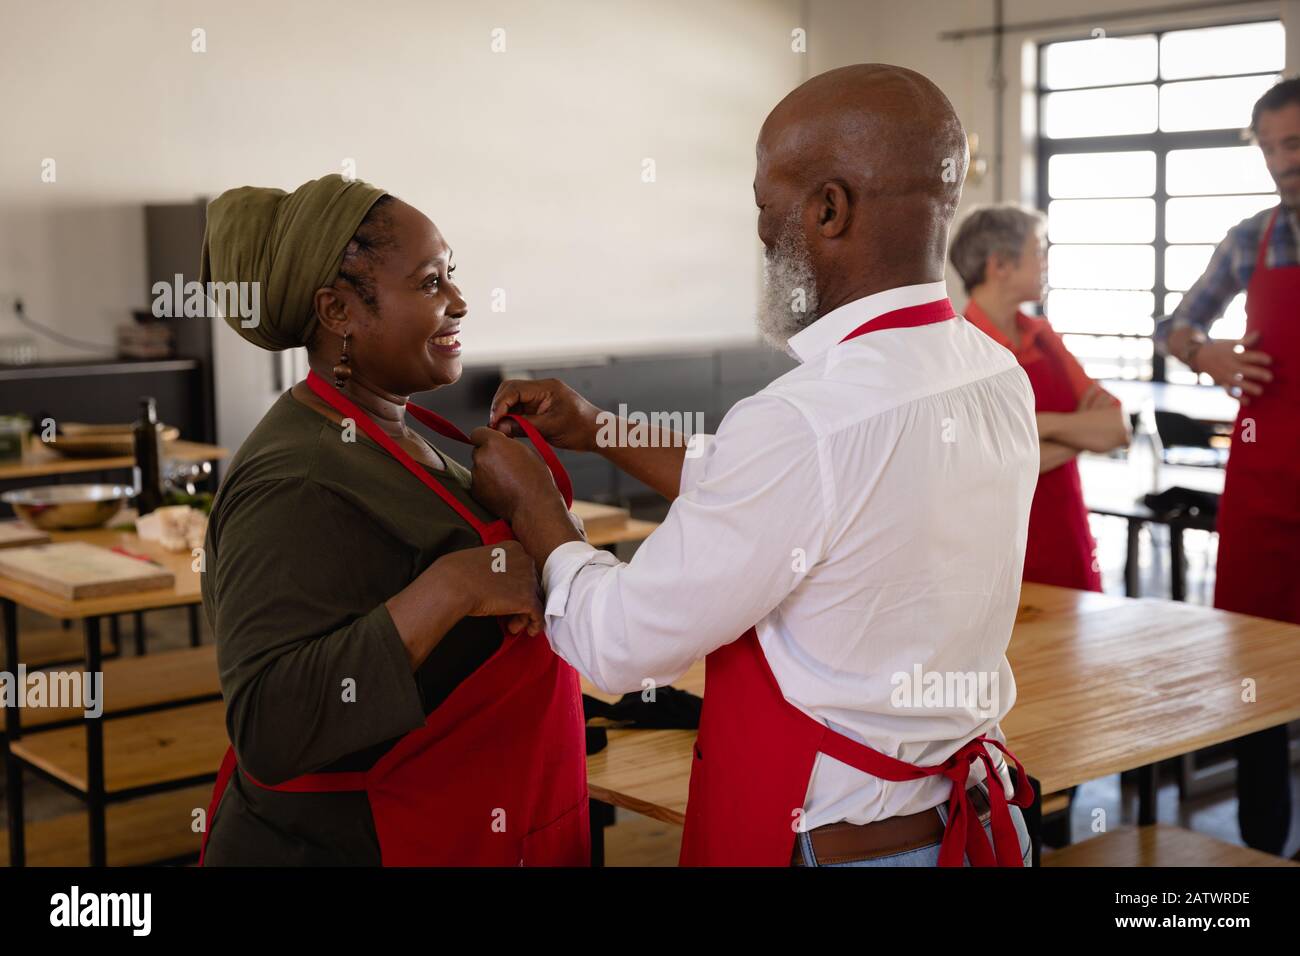 African man helping an African woman to put on her apron Stock Photo